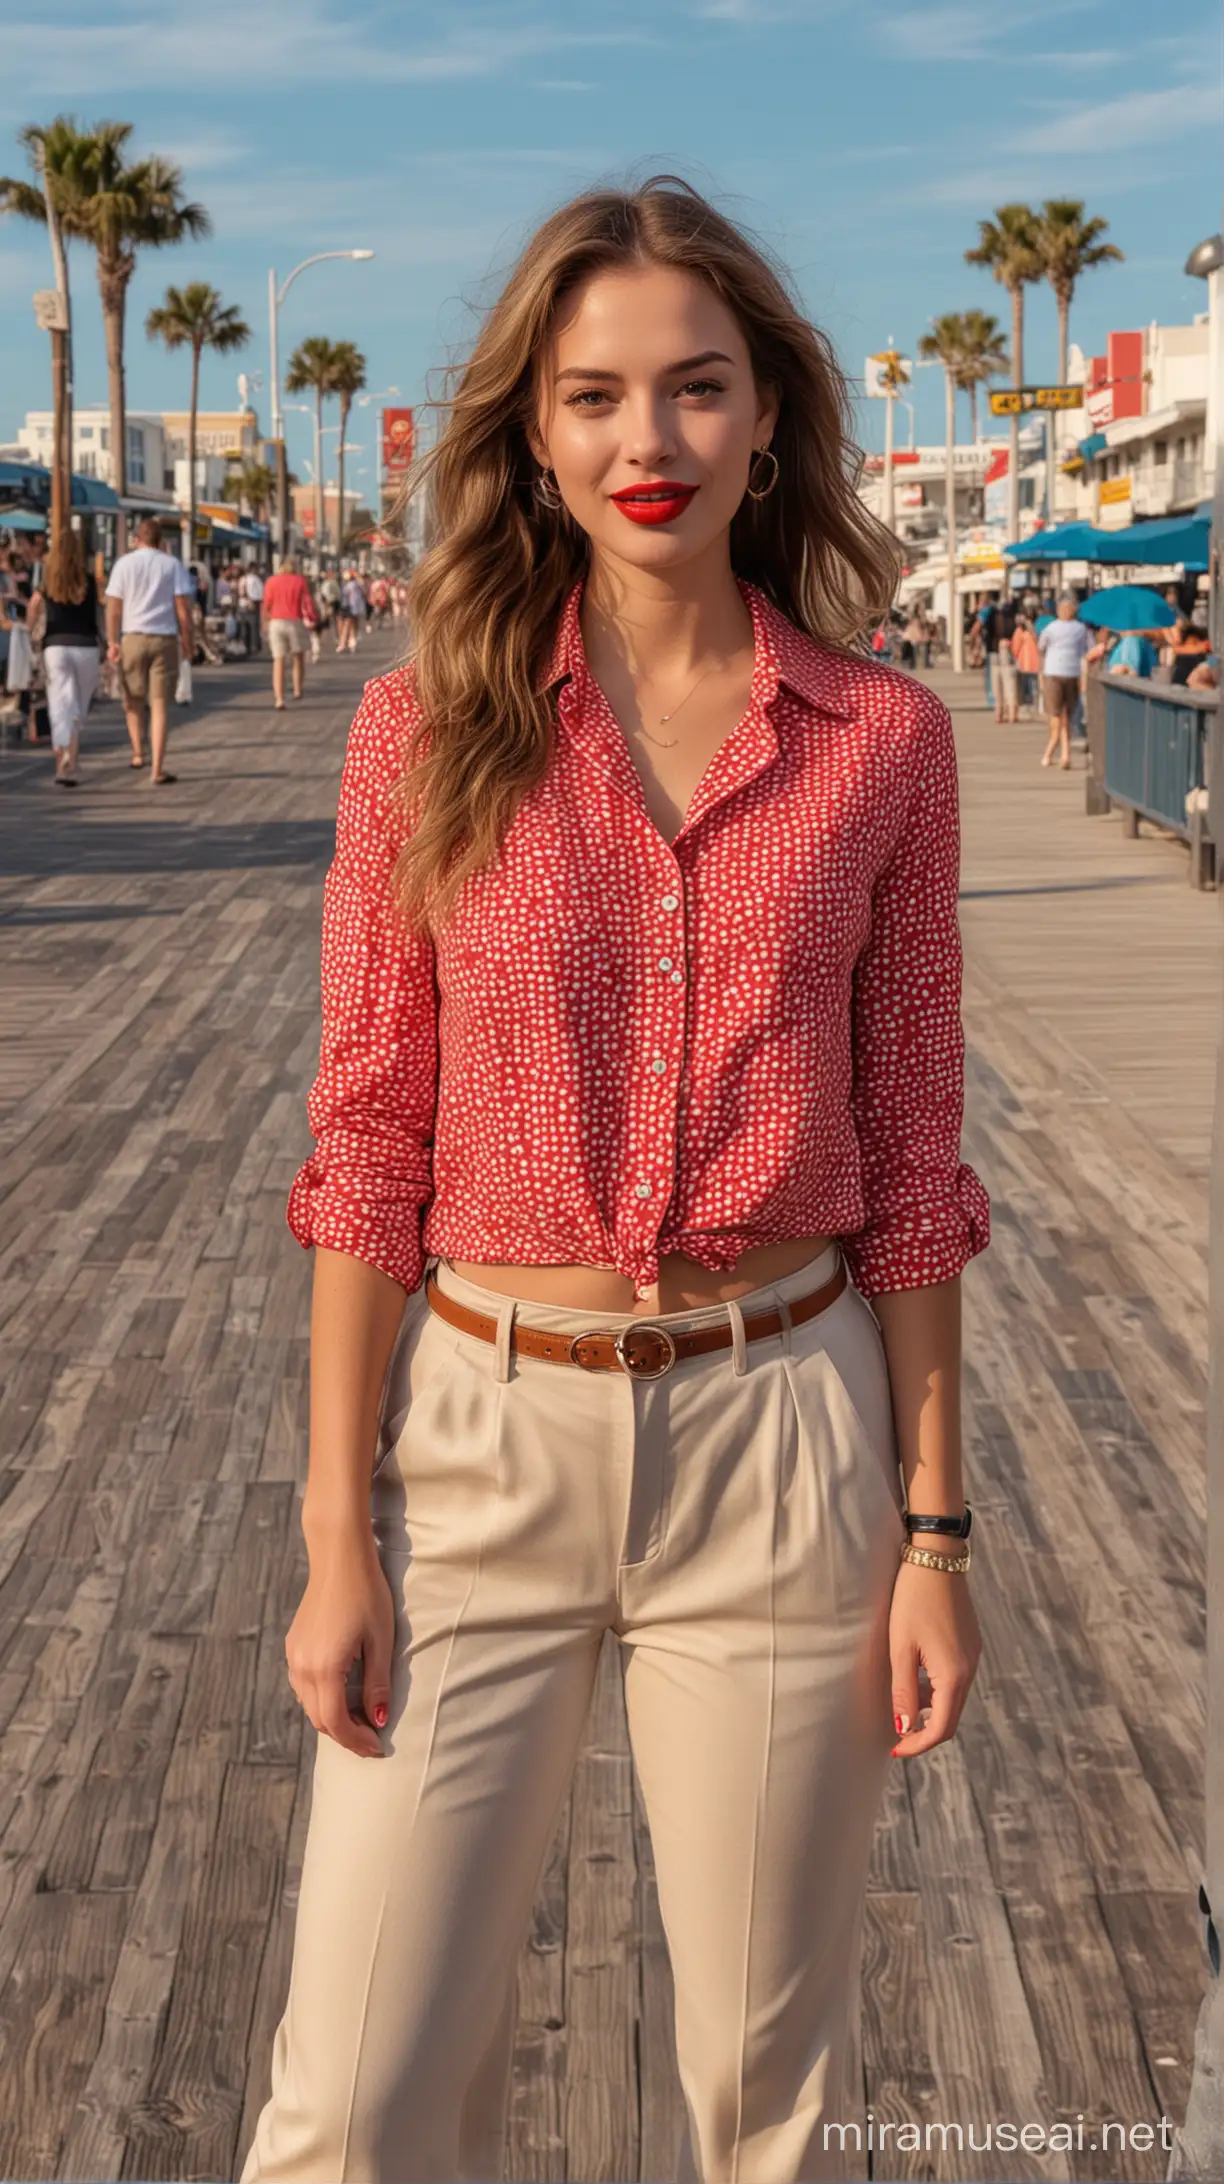 Beautiful USA Girl with Brown Open Hair and Red Lipstick at Ocean City Boardwalk